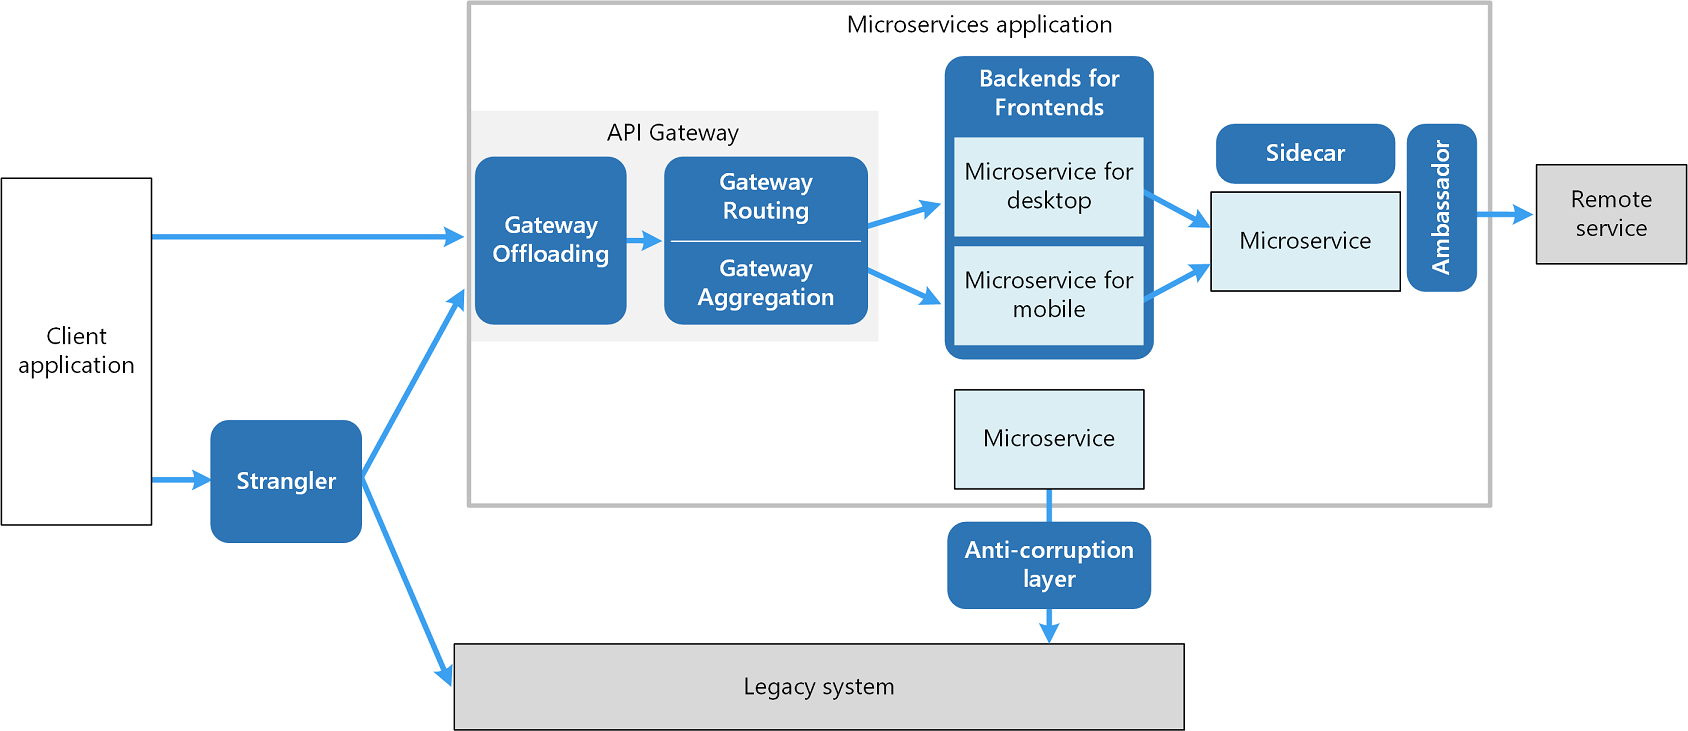 Microservices-Architectural-Design-Patterns-Playbook